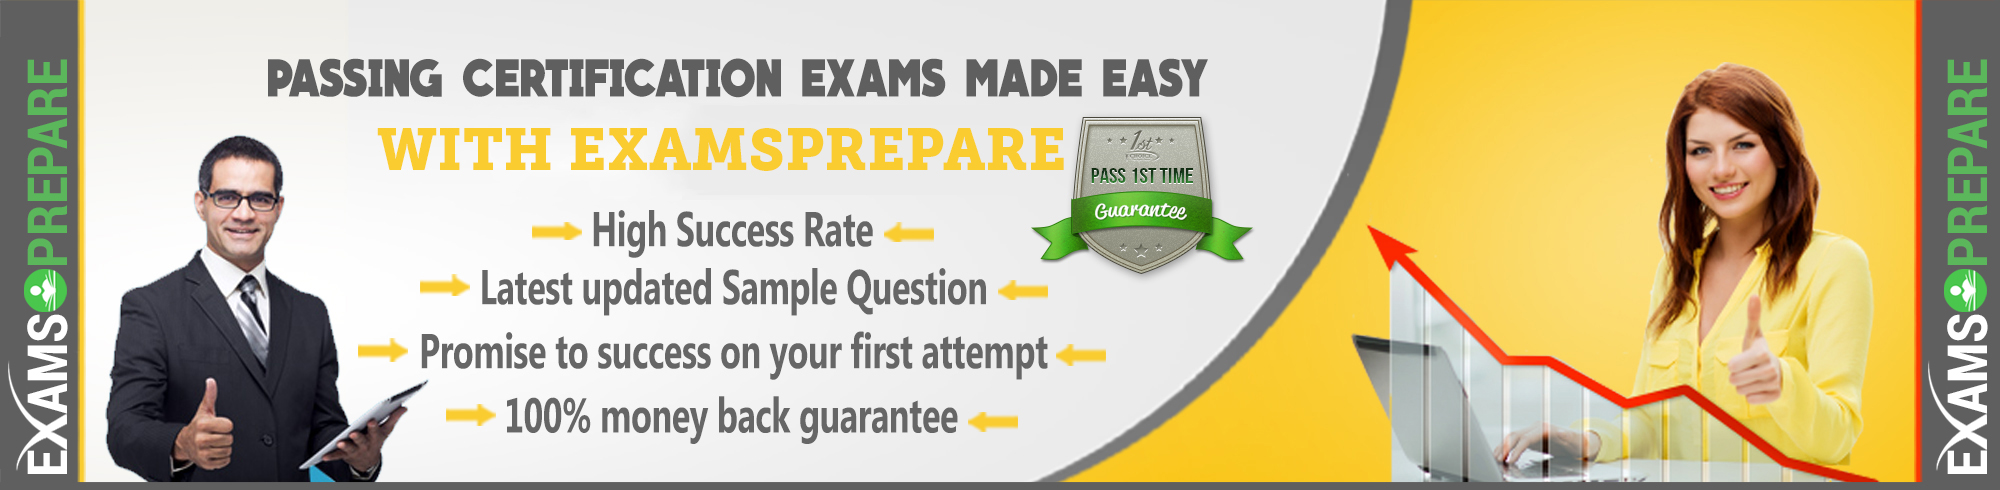 Learn with Real 1Z0-997-20 Exam Dumps